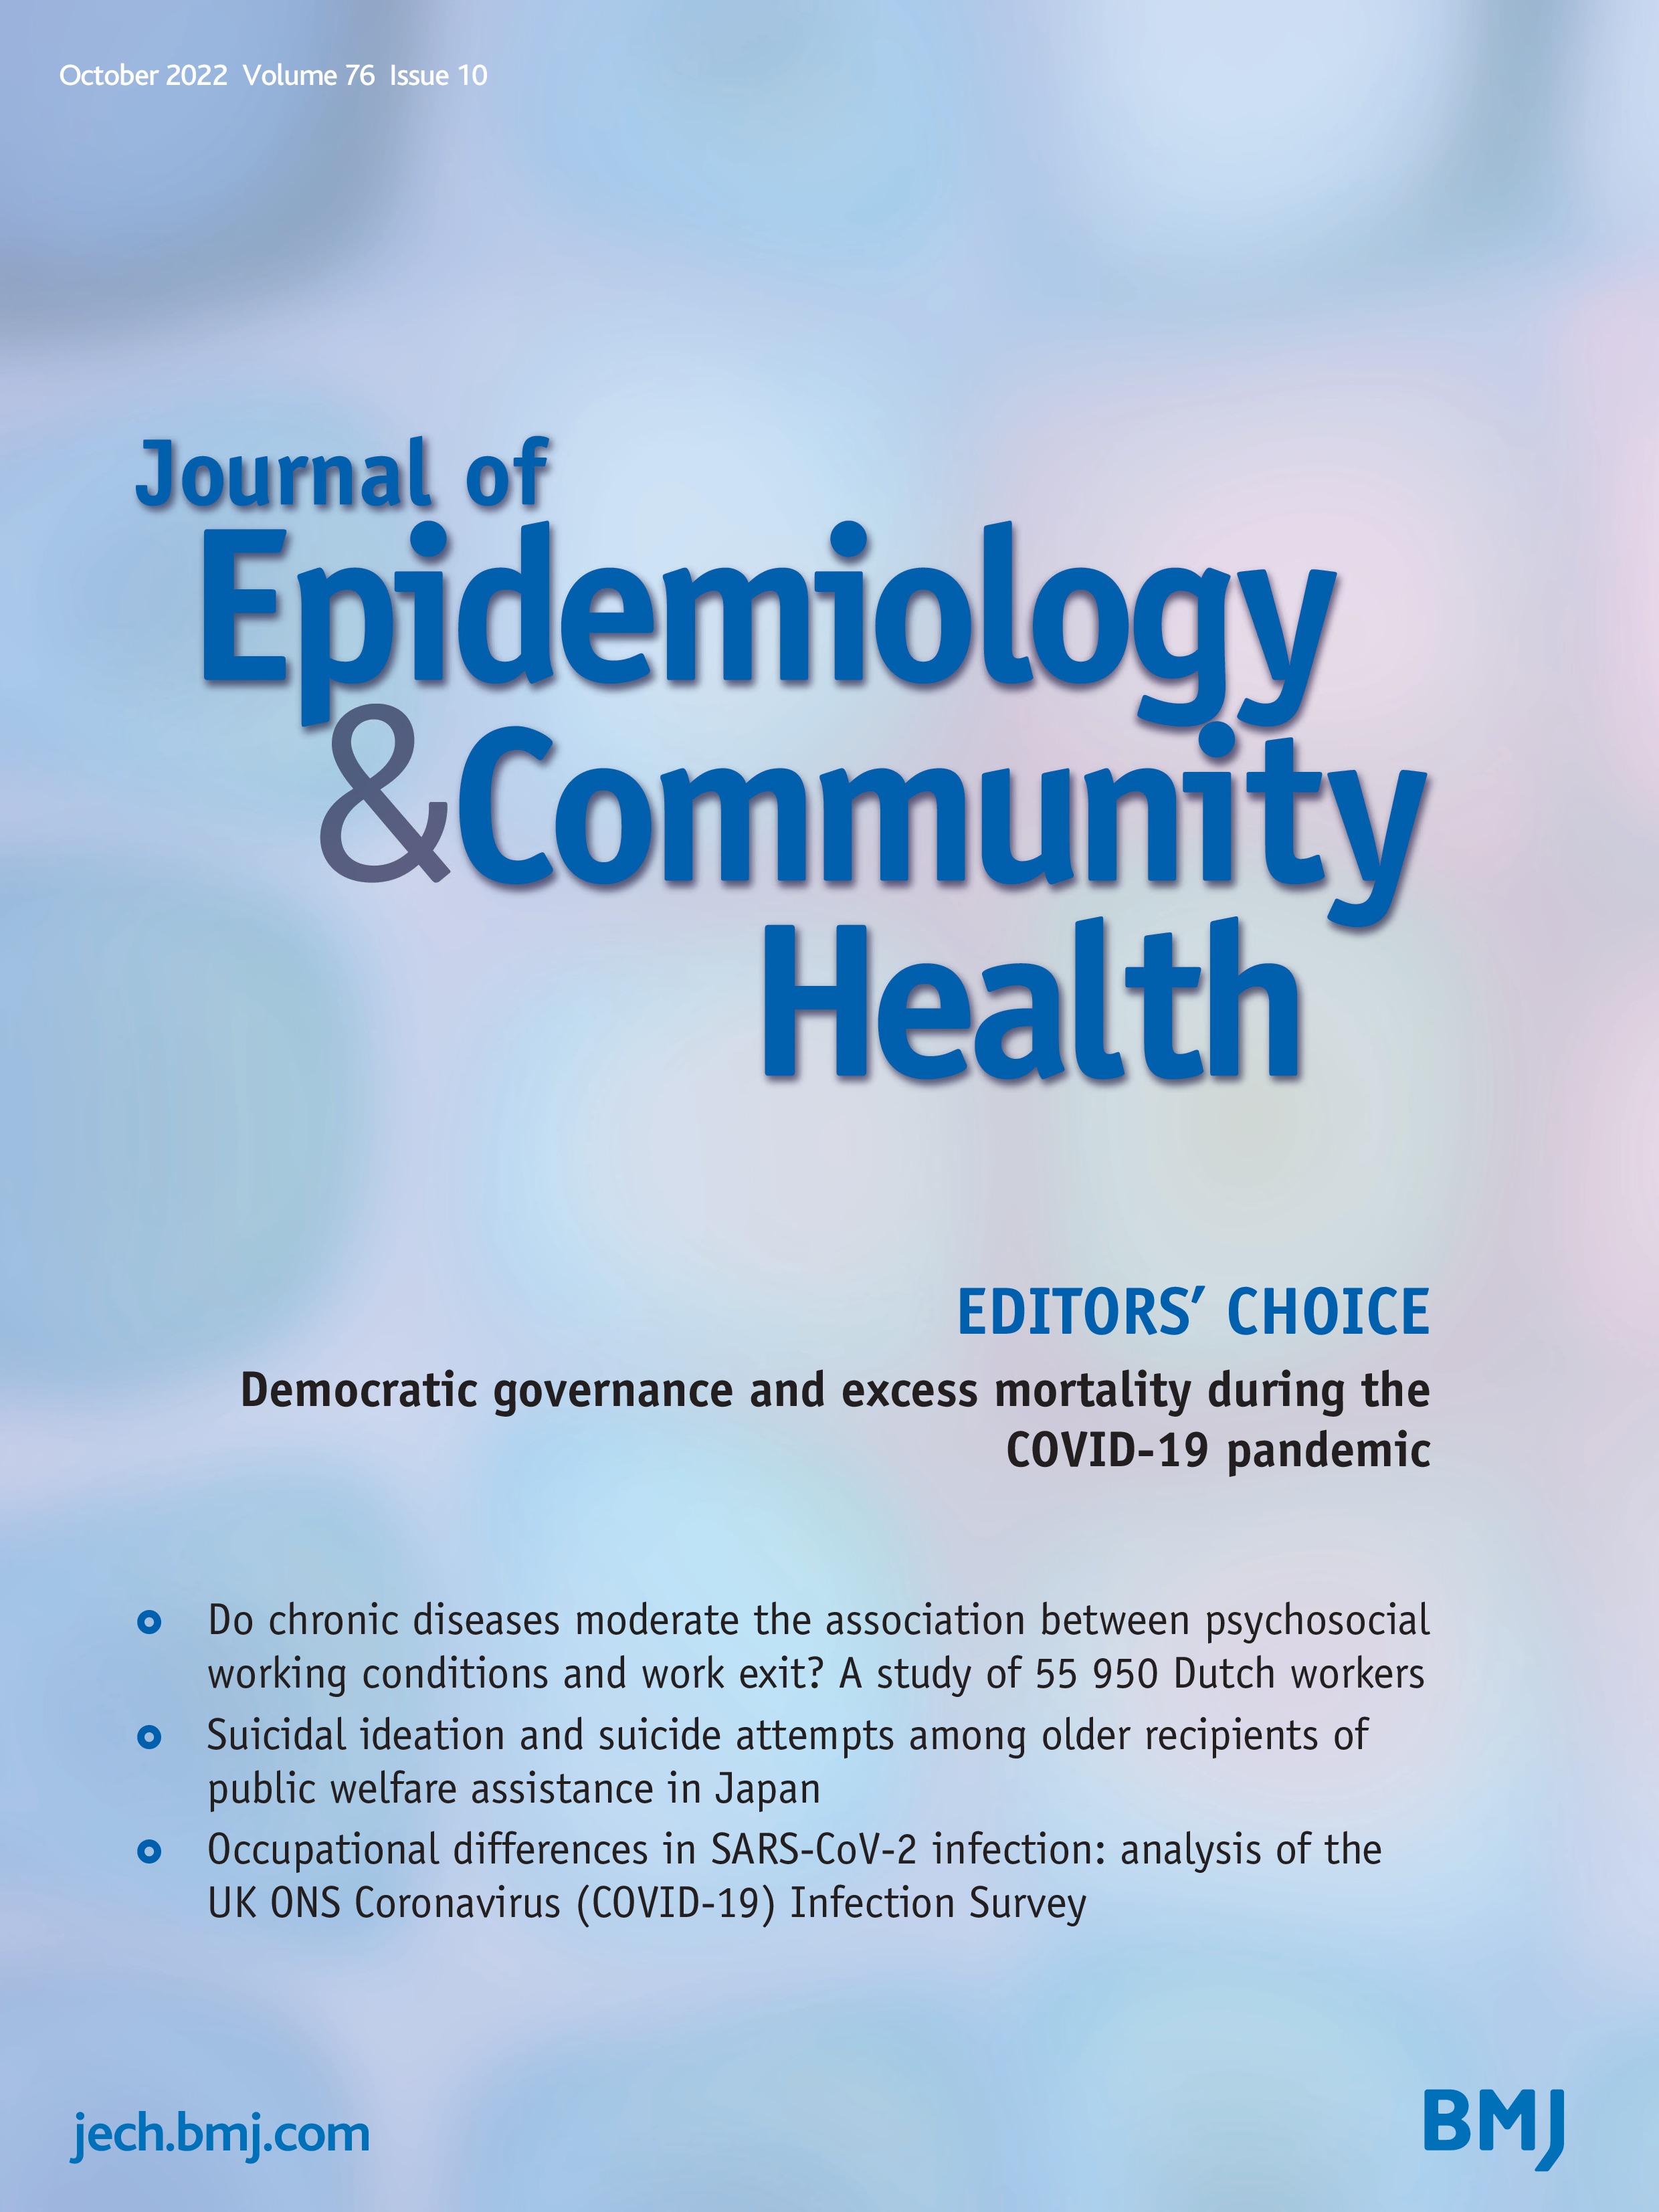 Association between democratic governance and excess mortality during the COVID-19 pandemic: an observational study